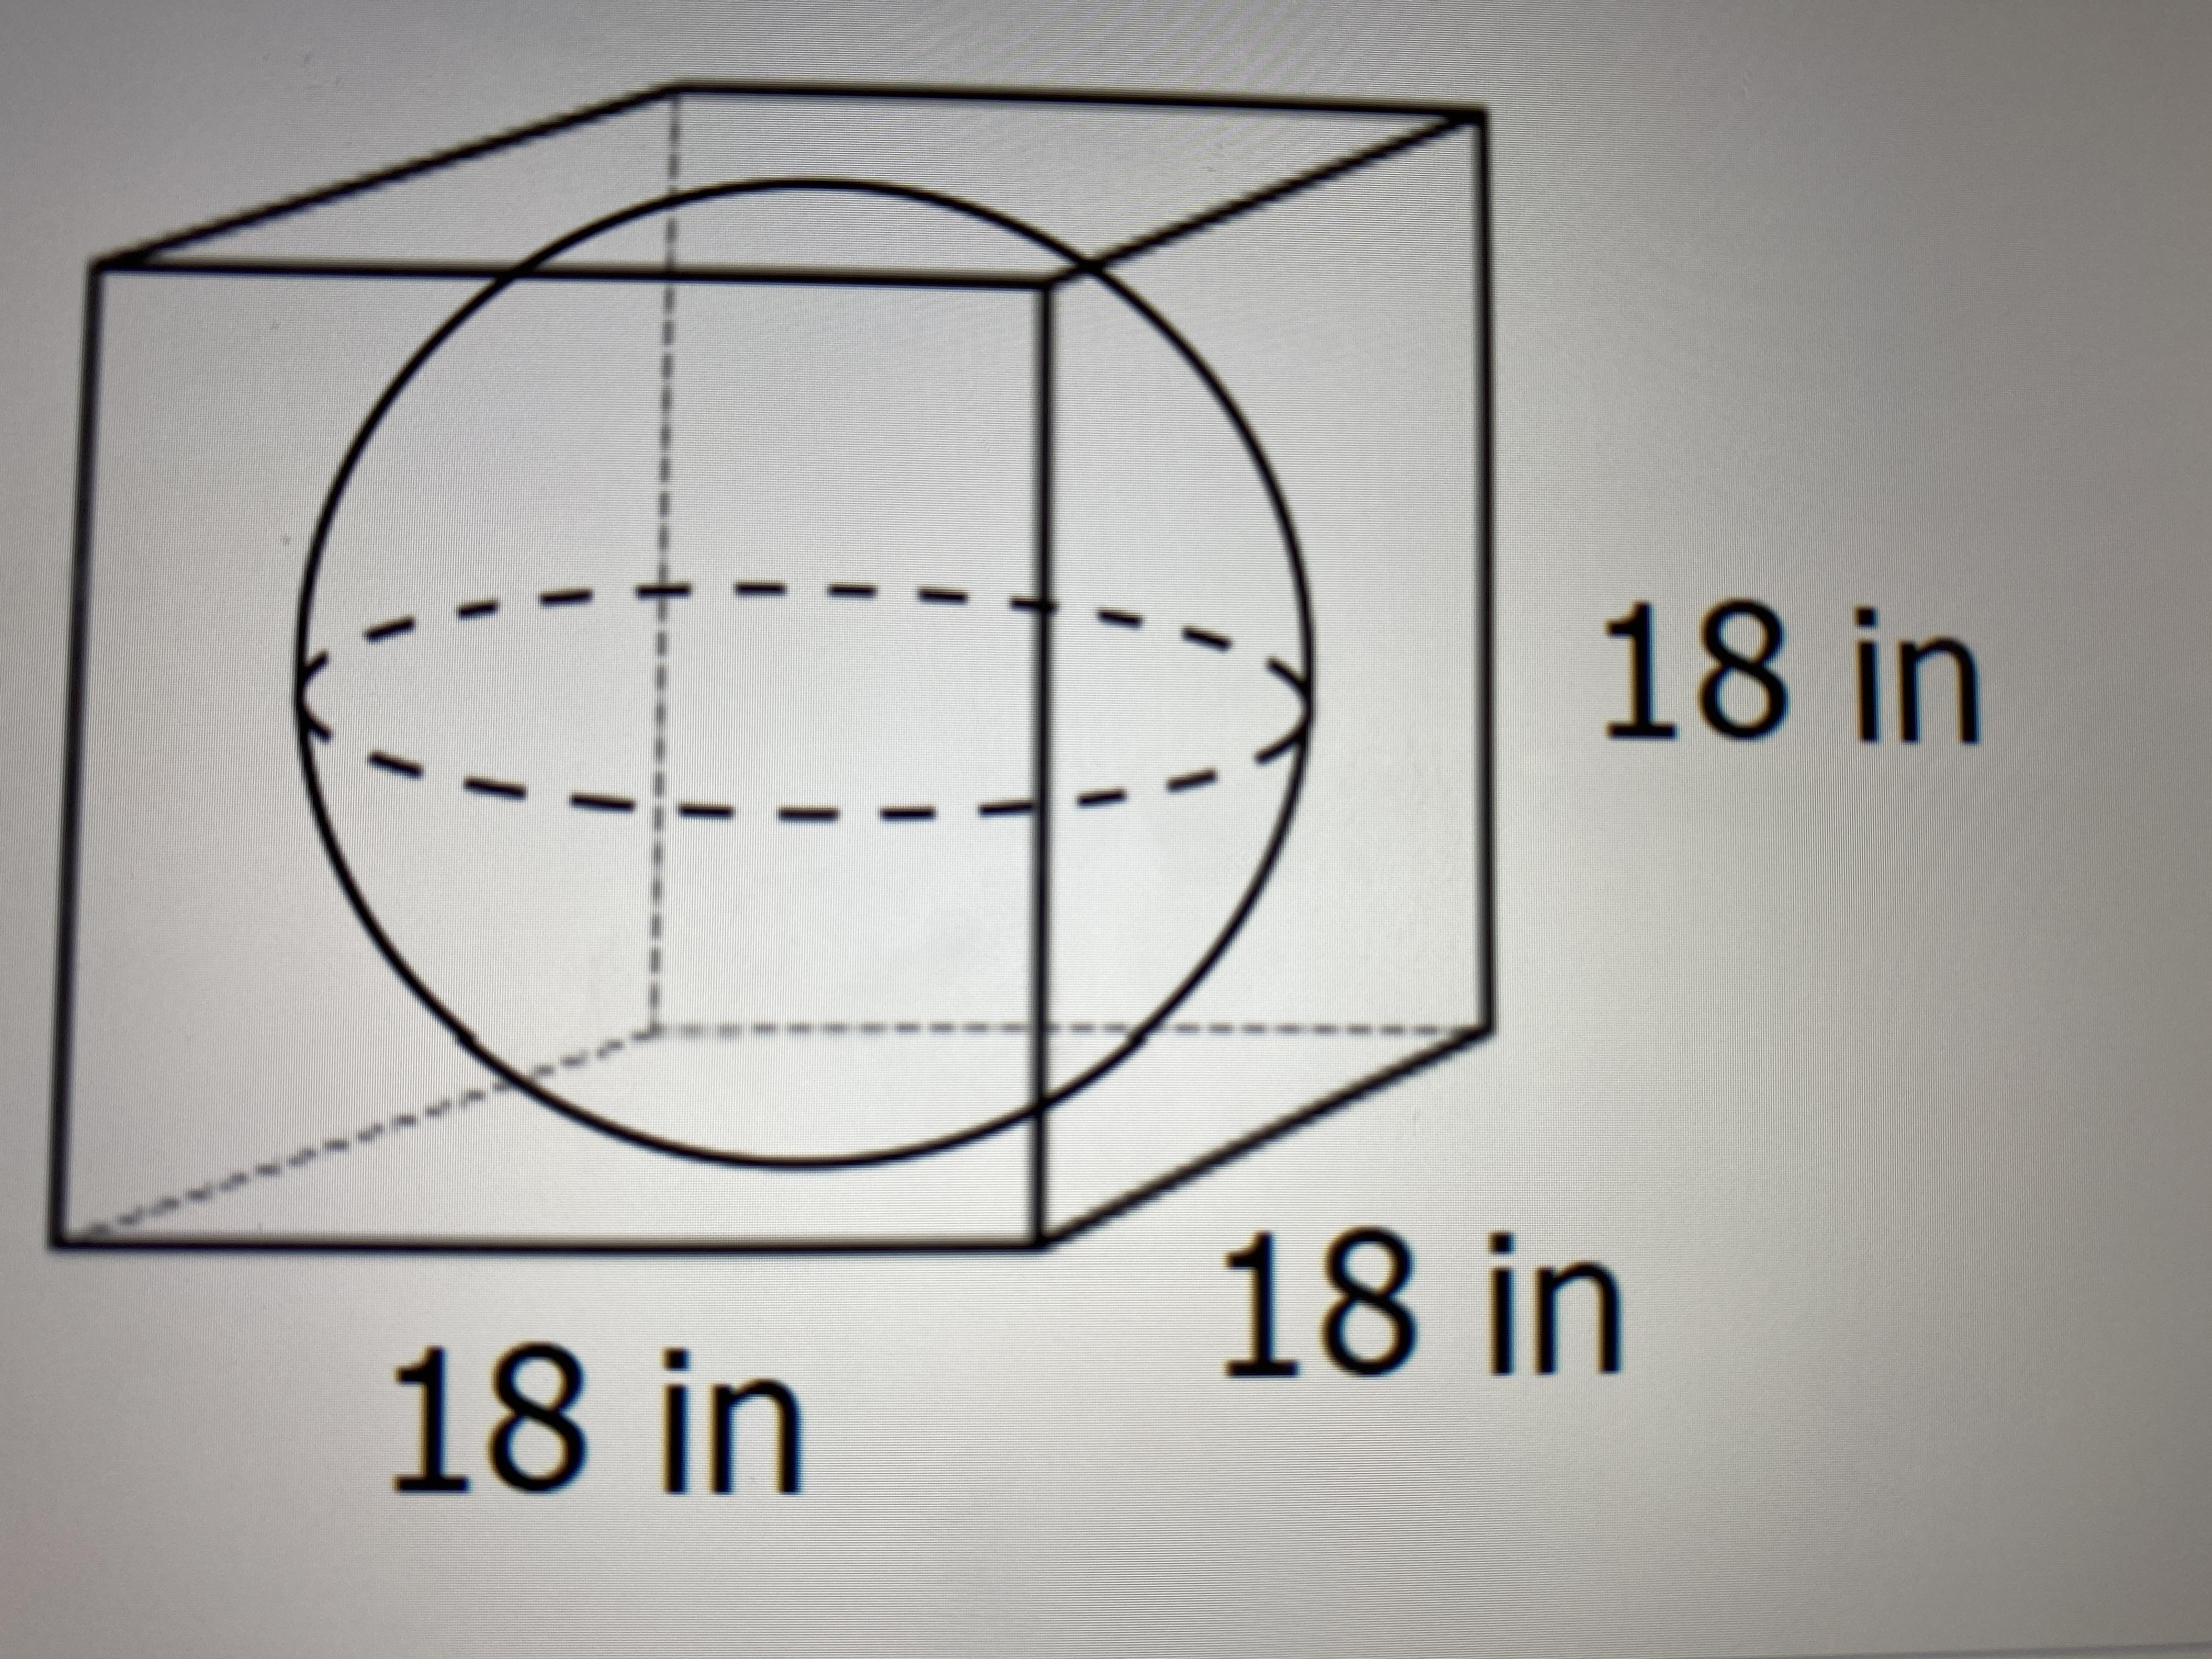 A Hallow Sphere Sits Snugly Inside A Foam Cube So That The Sphere Touches All Sides. Find The Volume